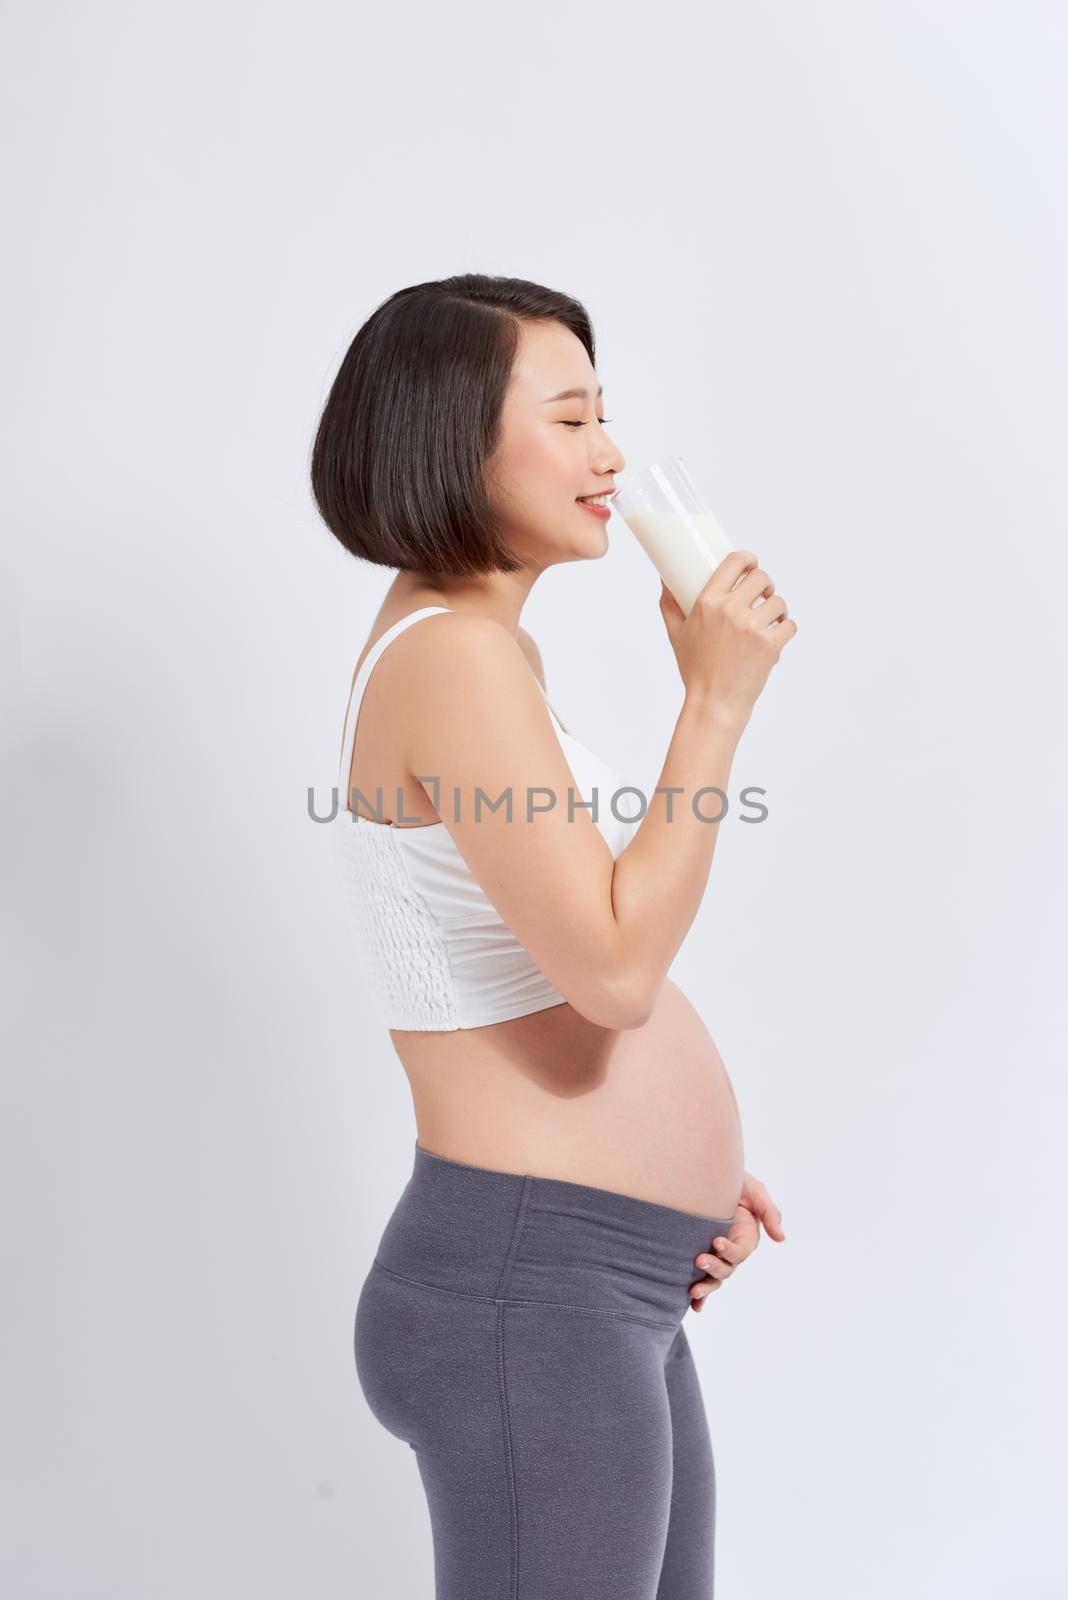 Pregnant woman drinking milk over white by makidotvn